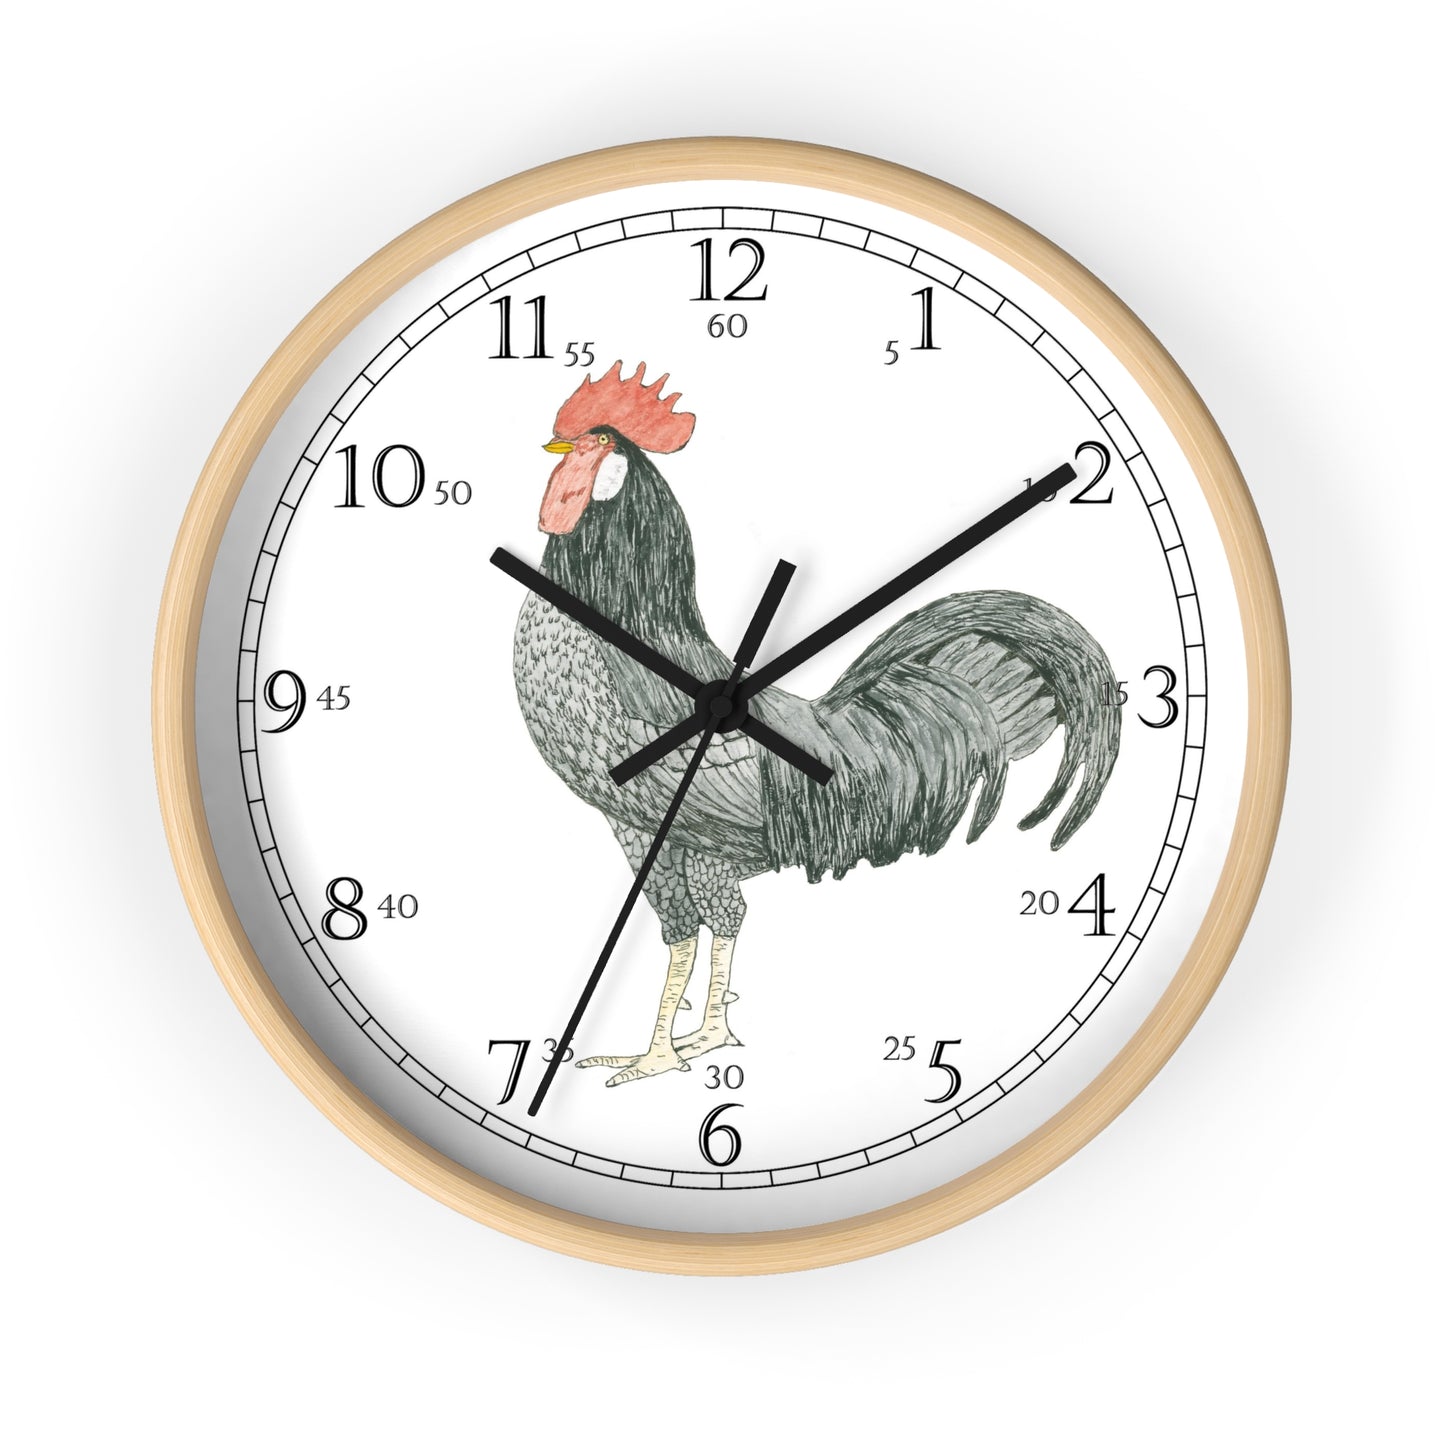 Adam Rooster English Numeral Clock